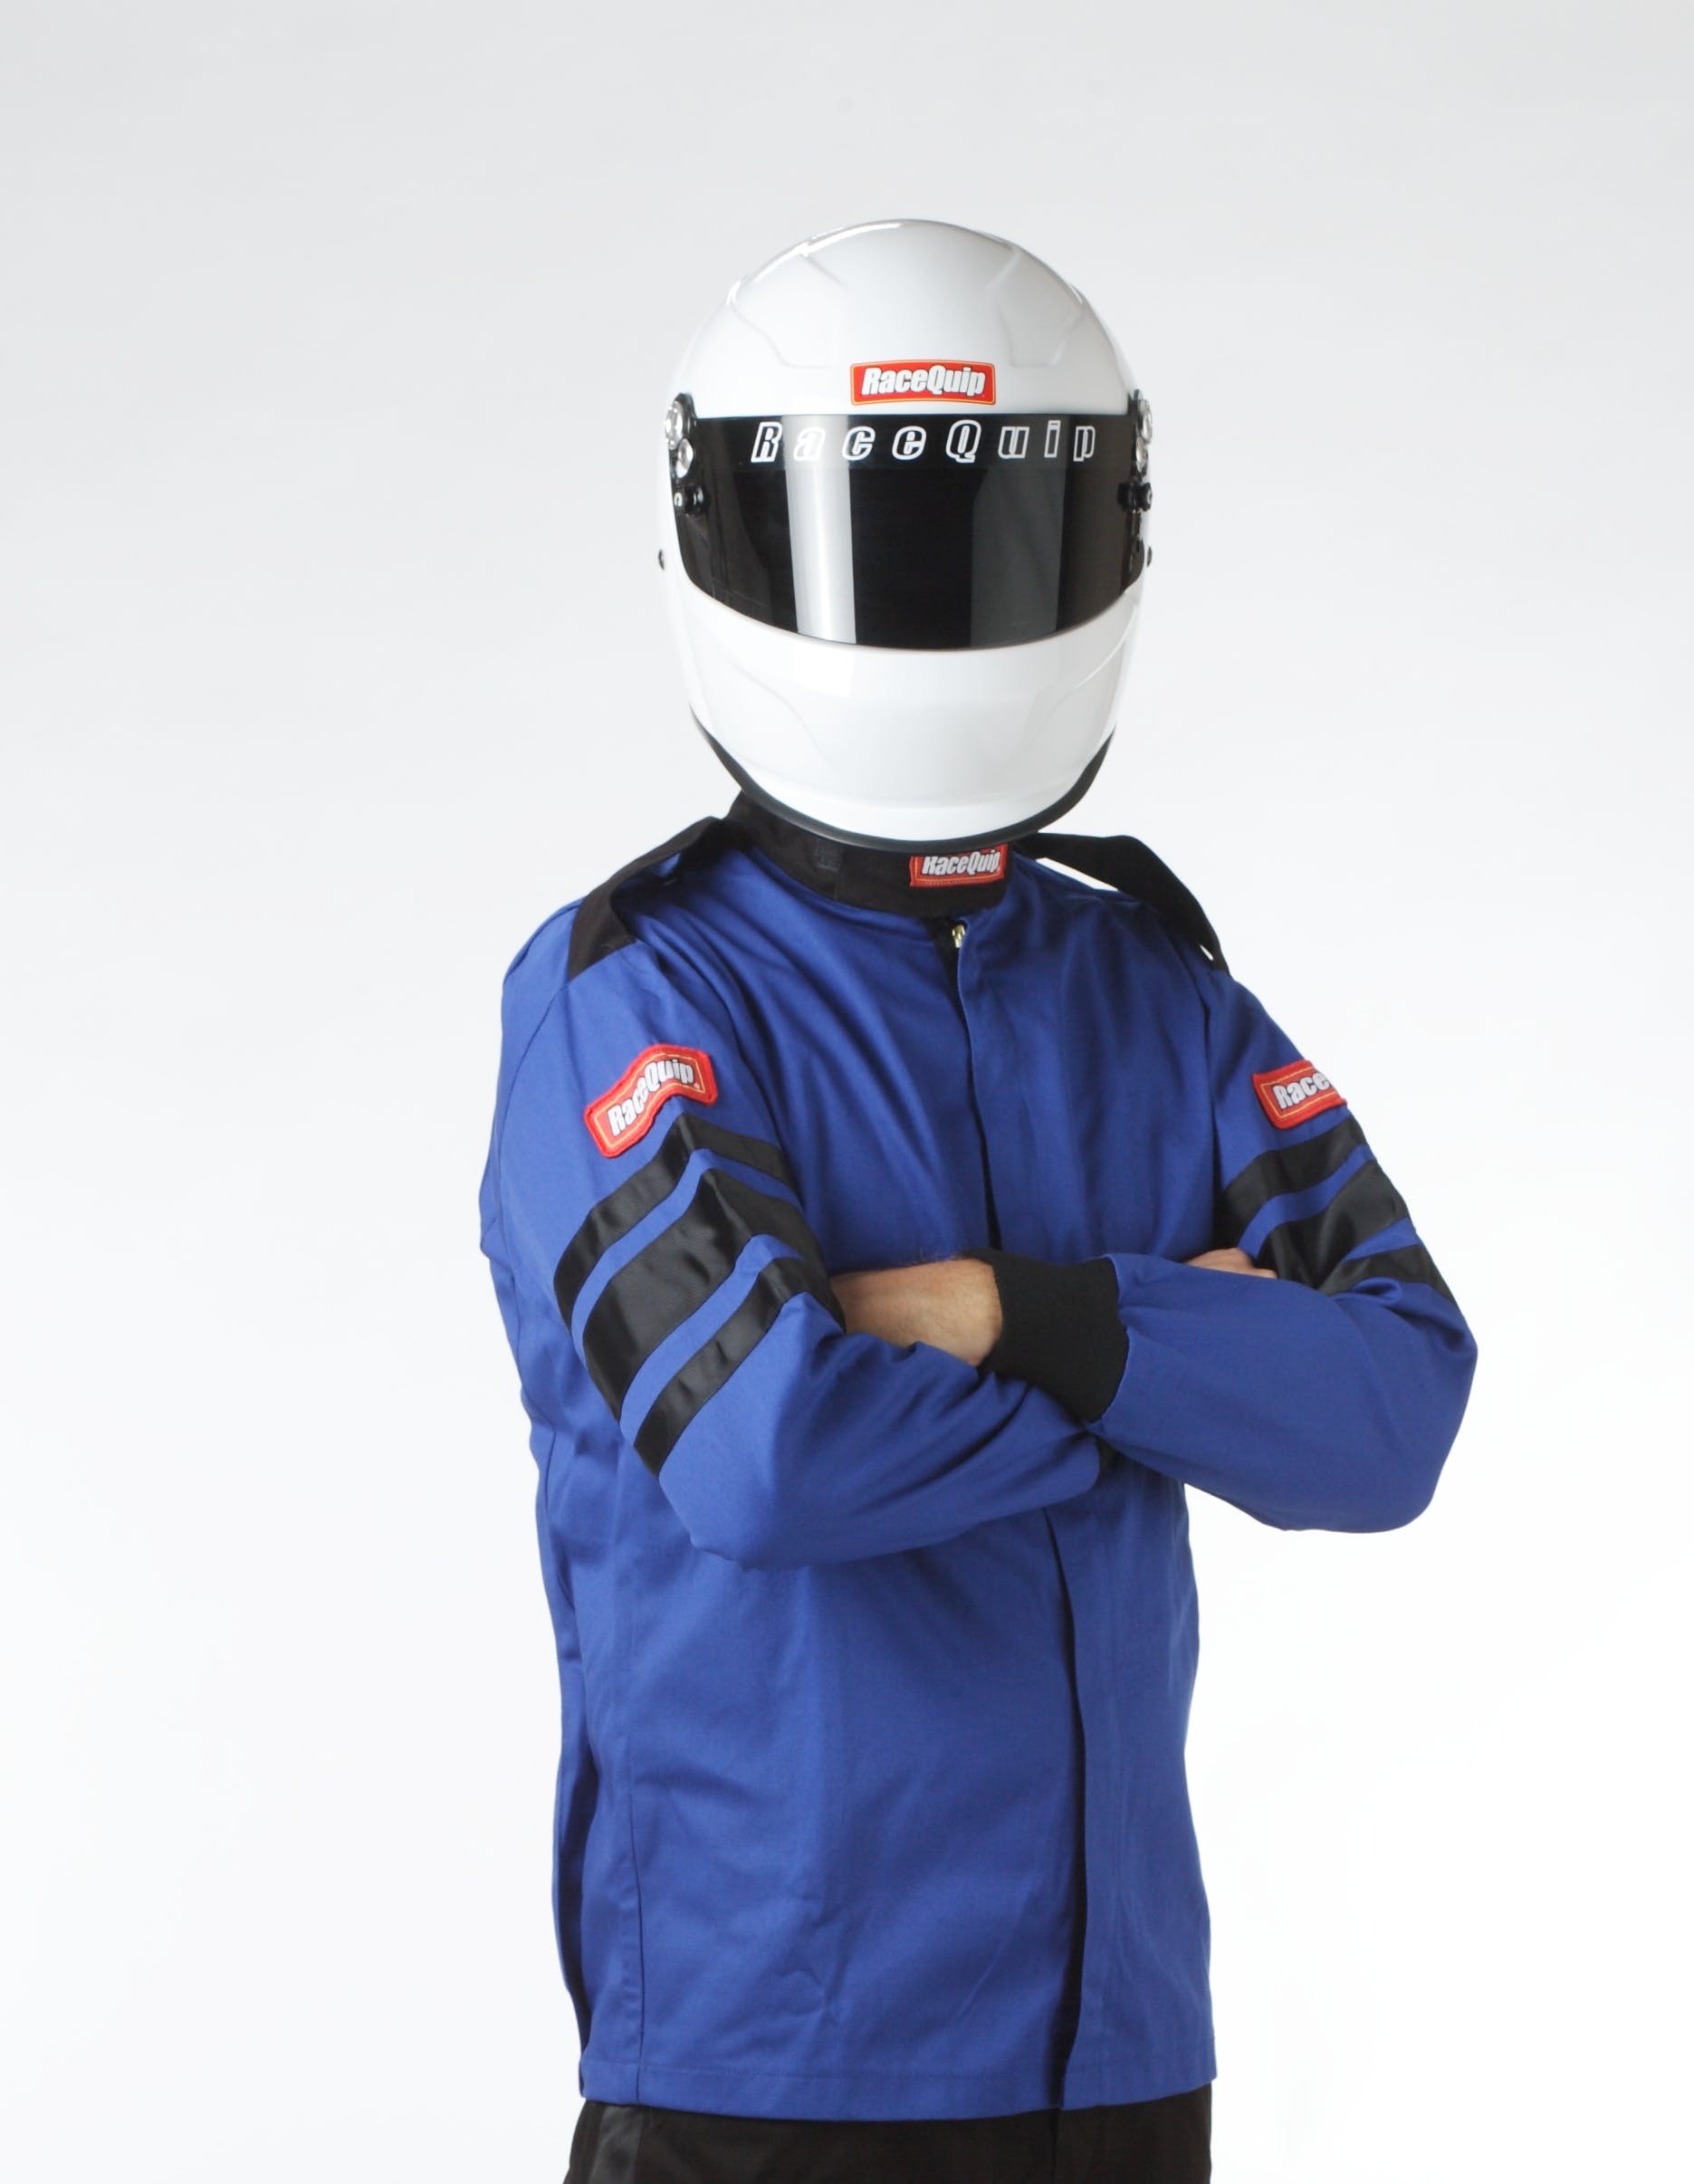 RaceQuip 111025 SFI-1 Pyrovatex Single-Layer Racing Fire Jacket (Blue, Large)